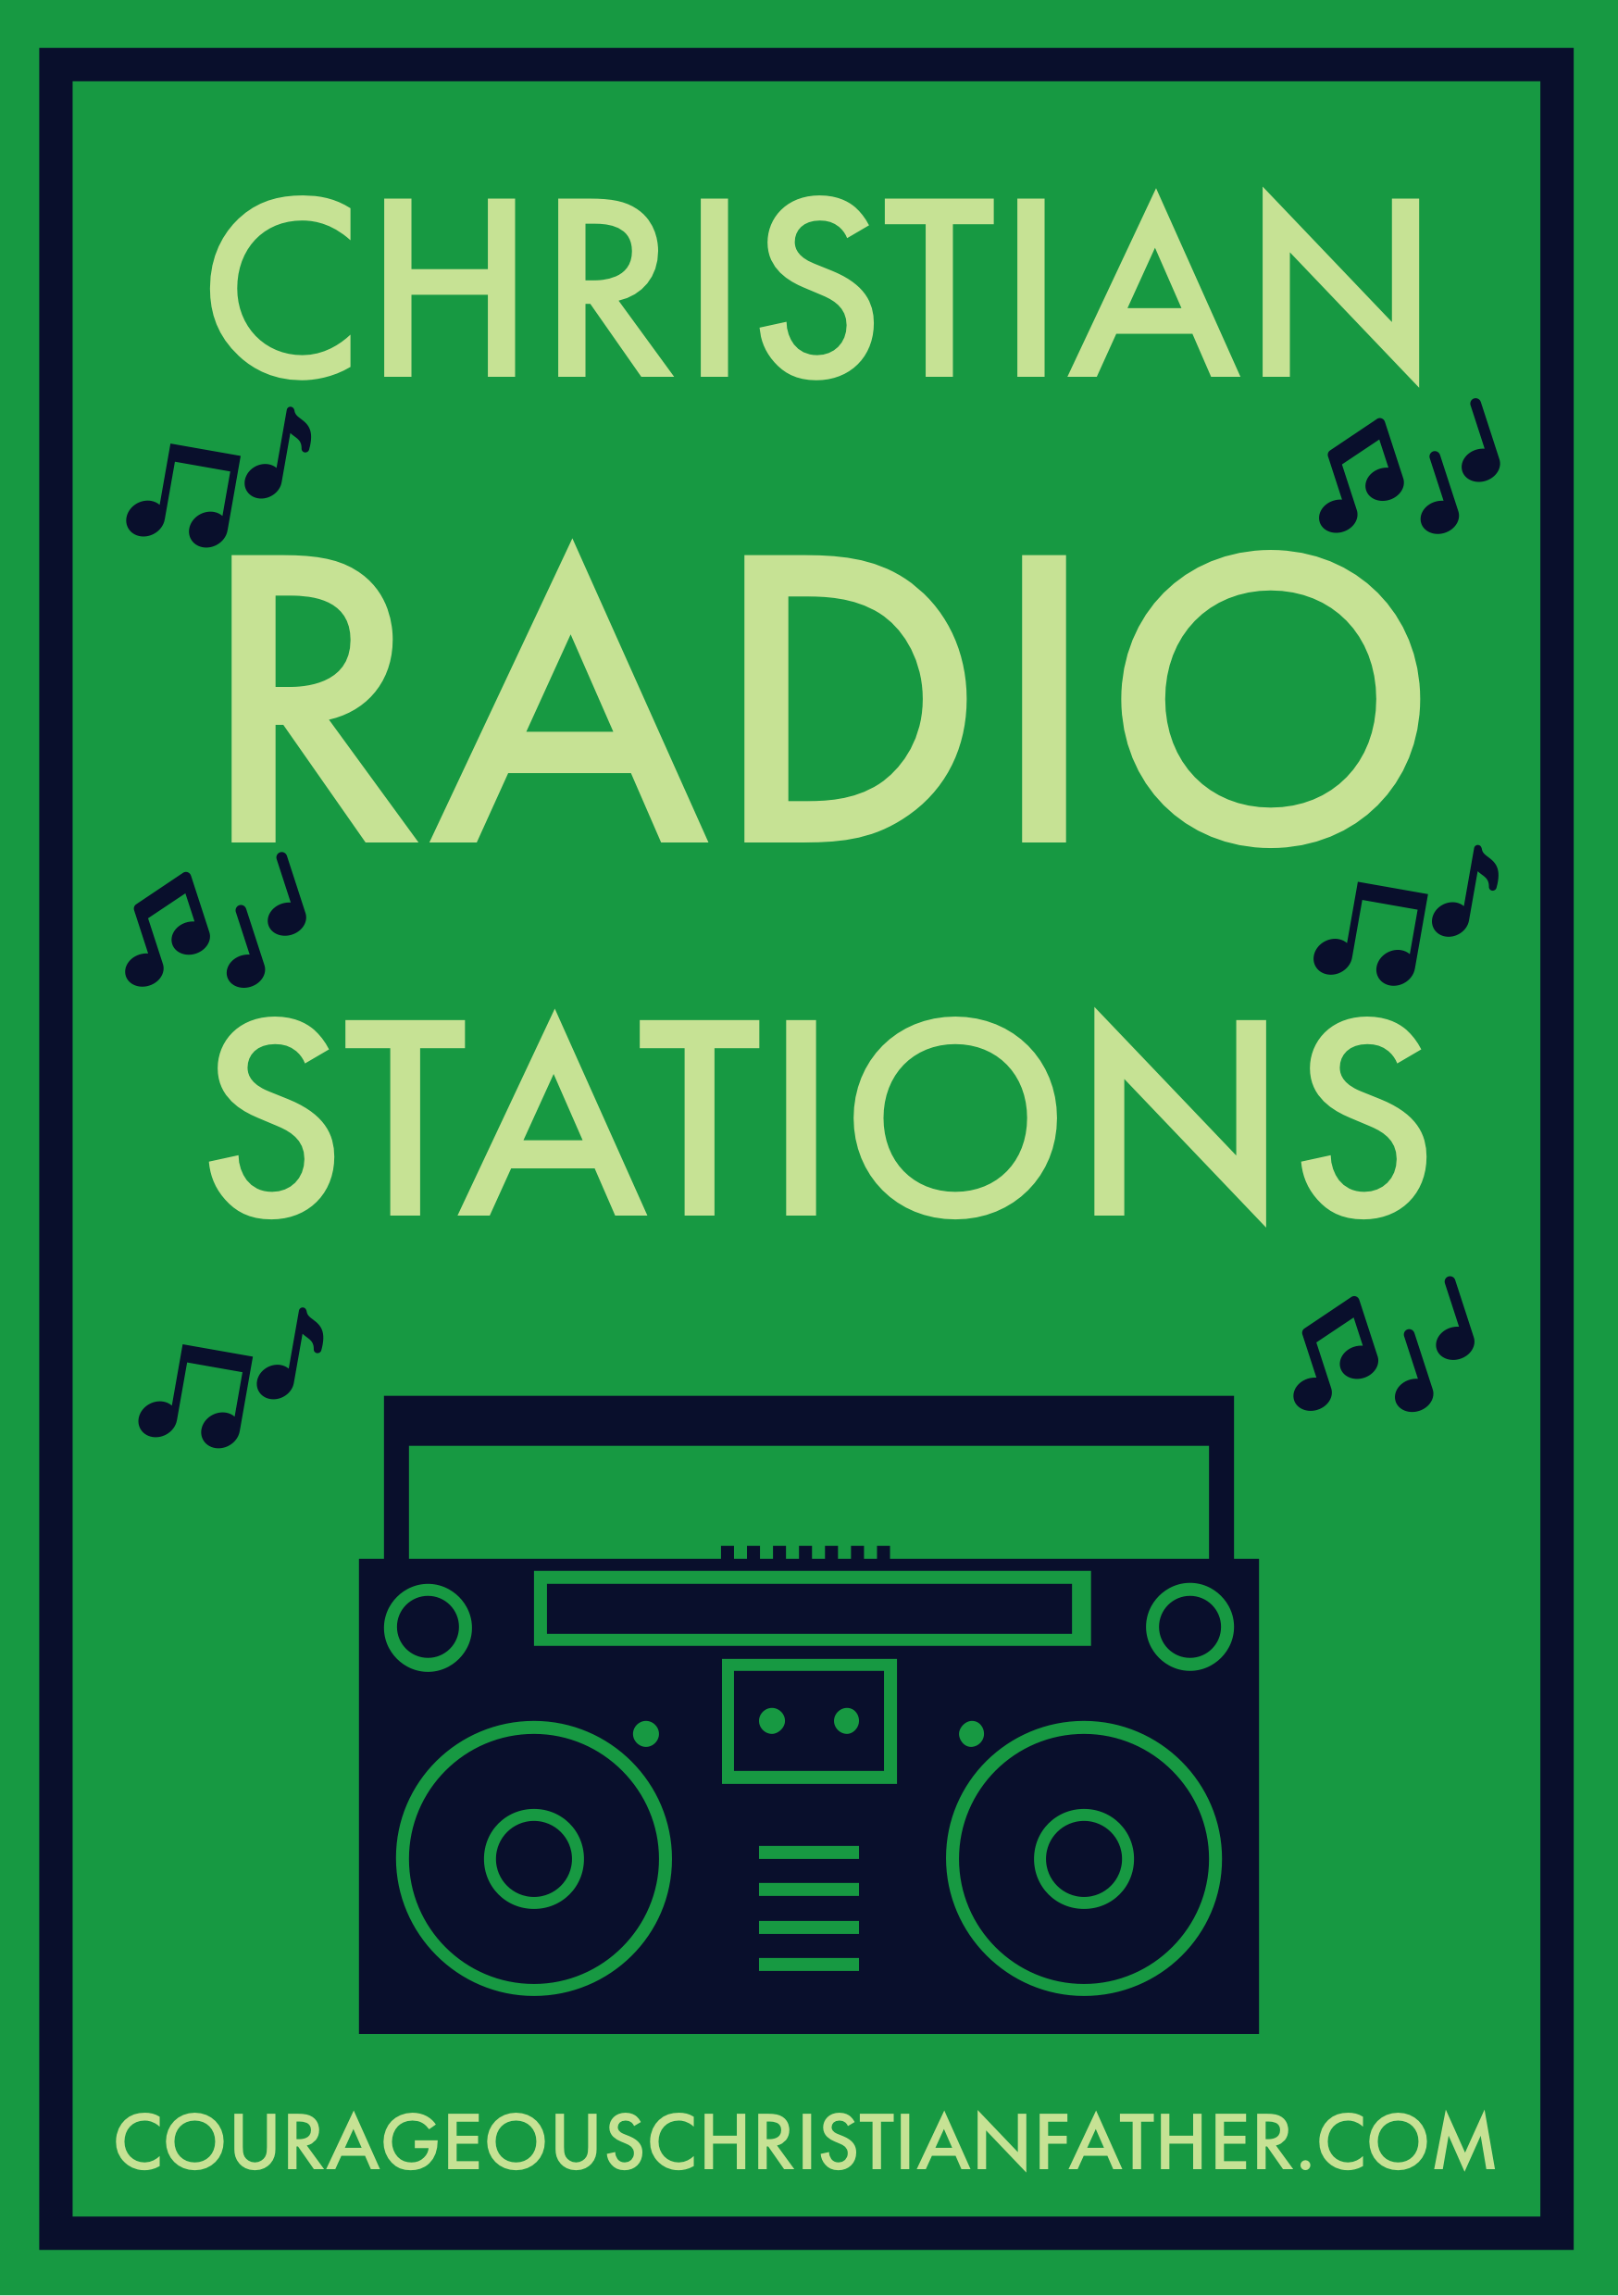 List of Christian Radio Stations - This is a list of compiled Christian Radio Stations from around the world, including throughout the United States. #ChristianRadio #ChristianRadioStations